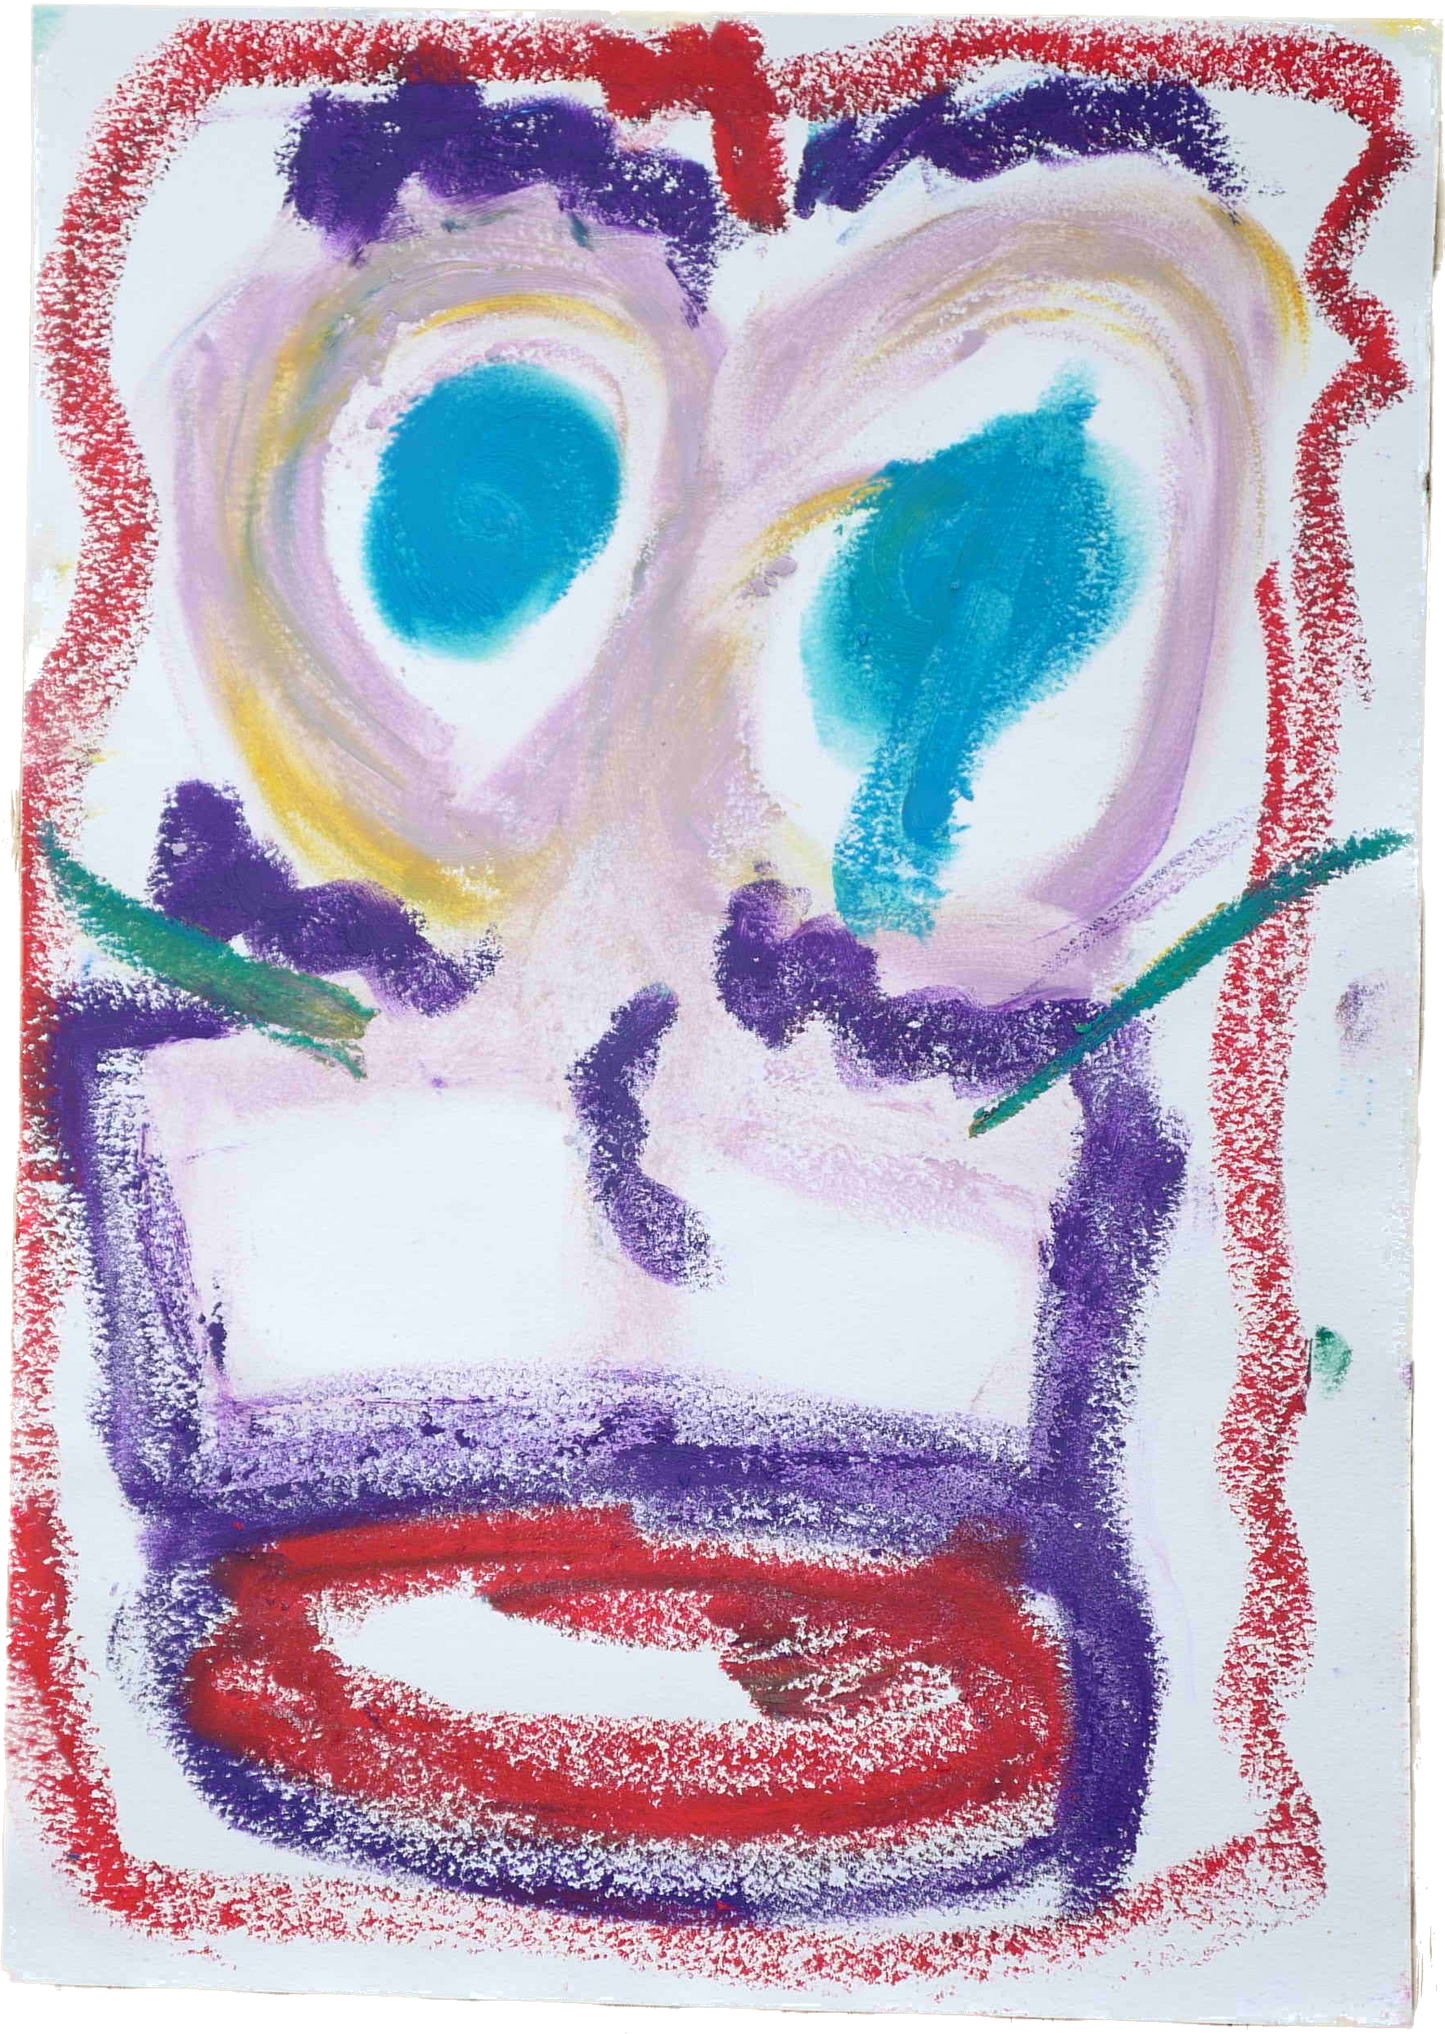 Lenfantvivant abstract expressionist face" "Vivid abstract visage on paper" "Edvard Munch style emotional art by Lenfantvivant" "Intense abstract facial expression in contemporary art" "Sauna Fusion No. 125 with emotive color interplay"